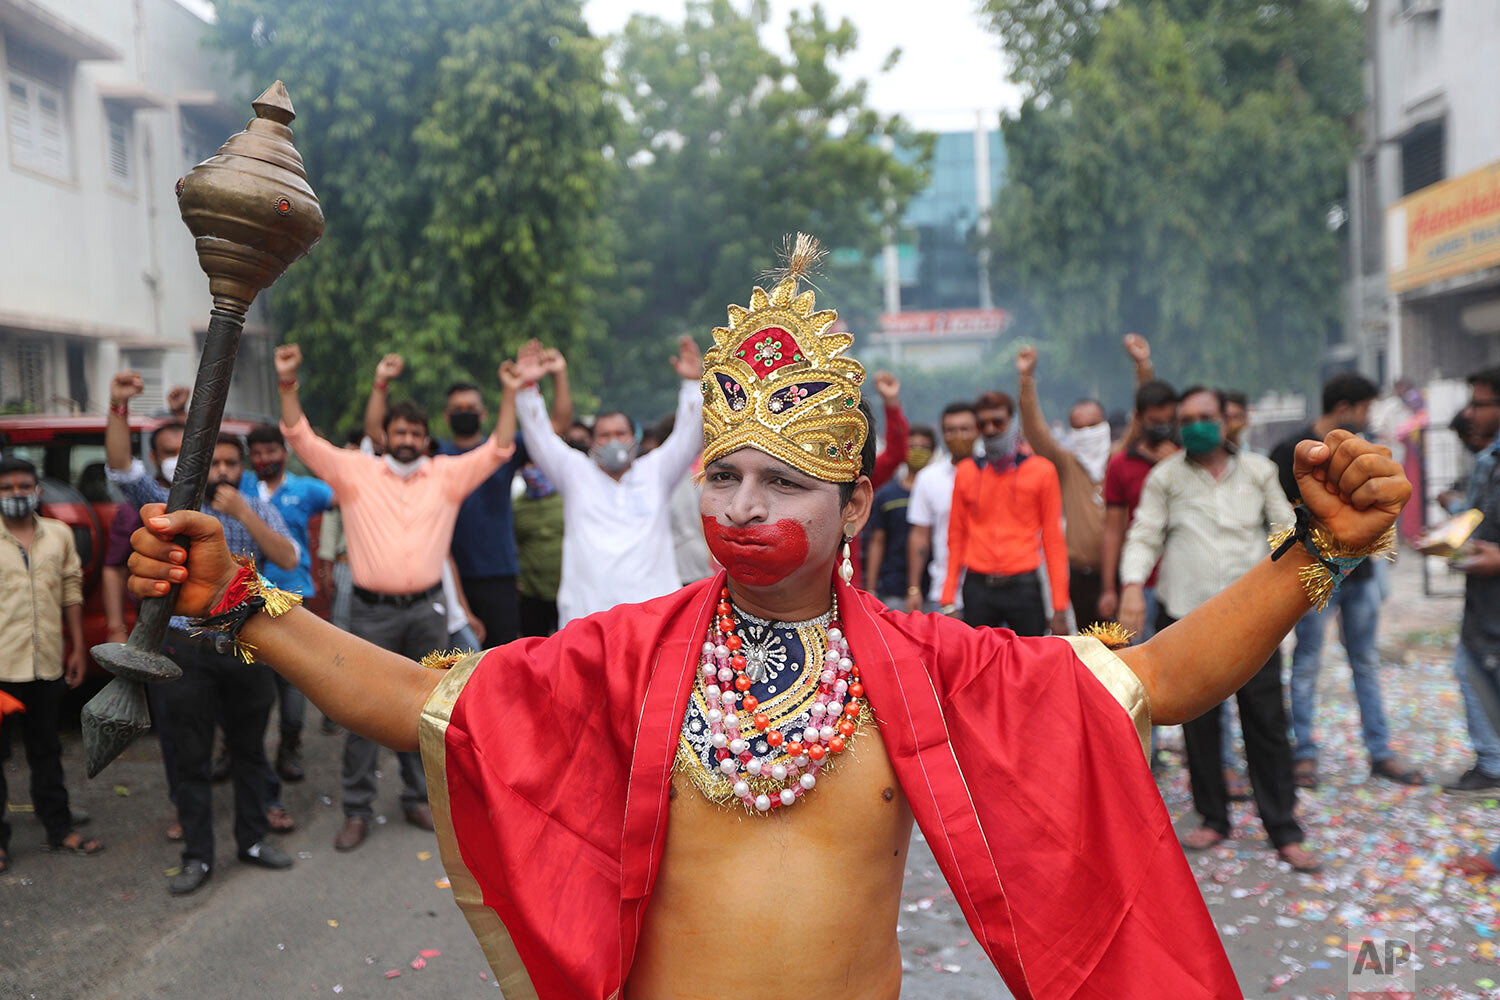  A man dressed as Hindu god Hanuman participates in a celebration by Vishwa Hindu Parishad or World Hindu Council to mark the groundbreaking ceremony of a temple dedicated to Hindu god Ram in Ayodhya, in Ahmedabad, India, Wednesday, Aug. 5, 2020.  (A